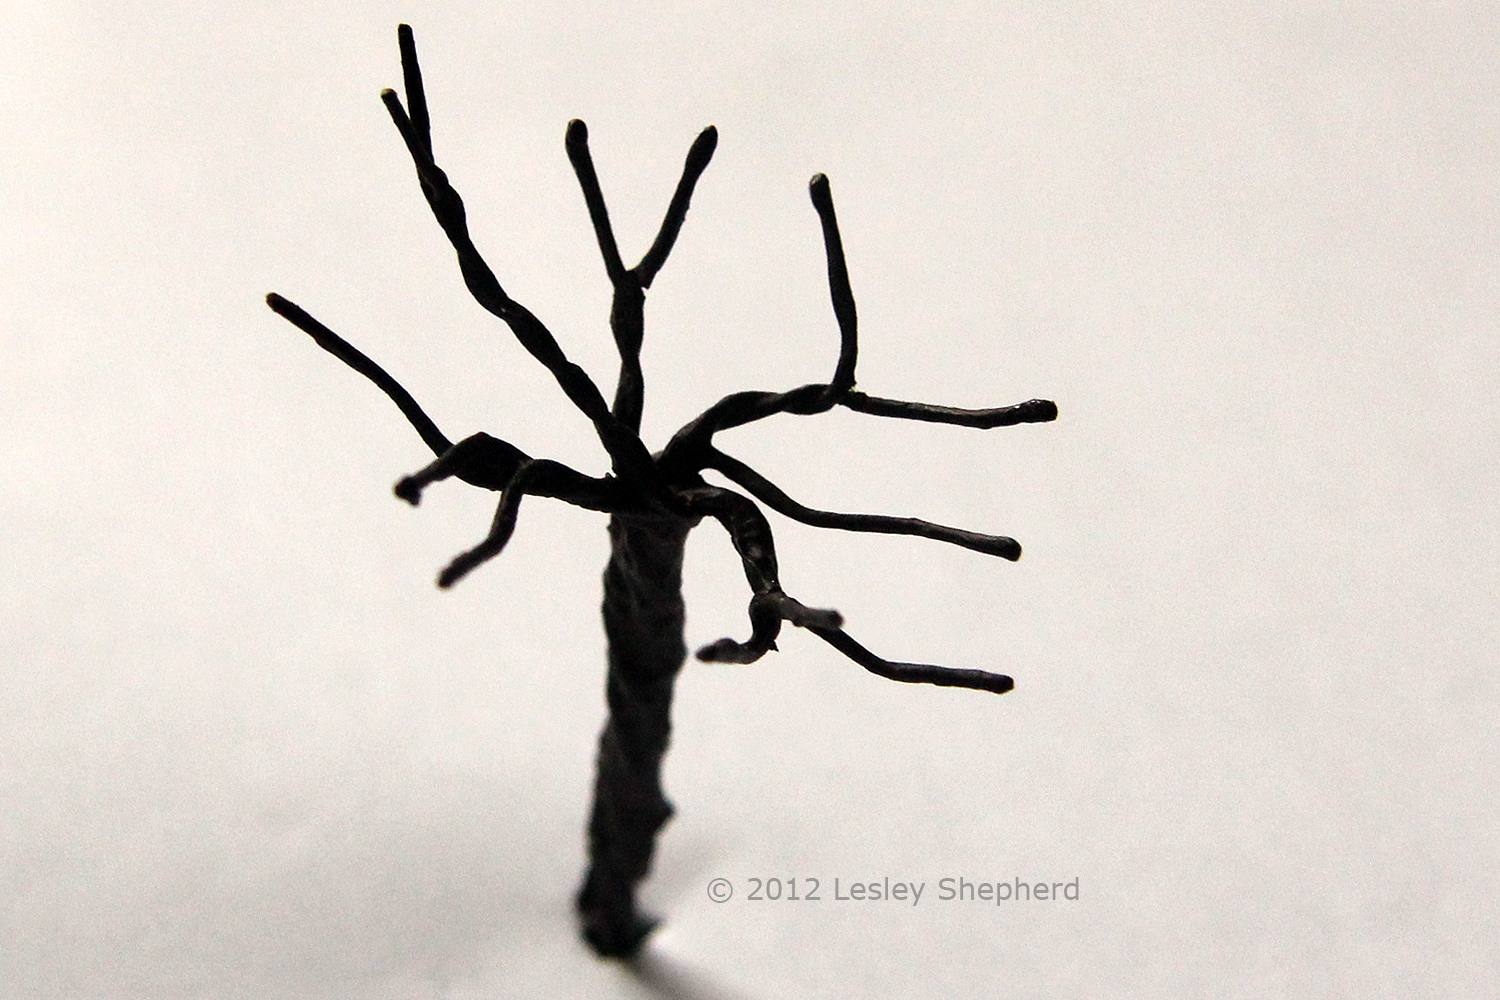 Shaping the branches of a model tree so they spread out in three dimensions.